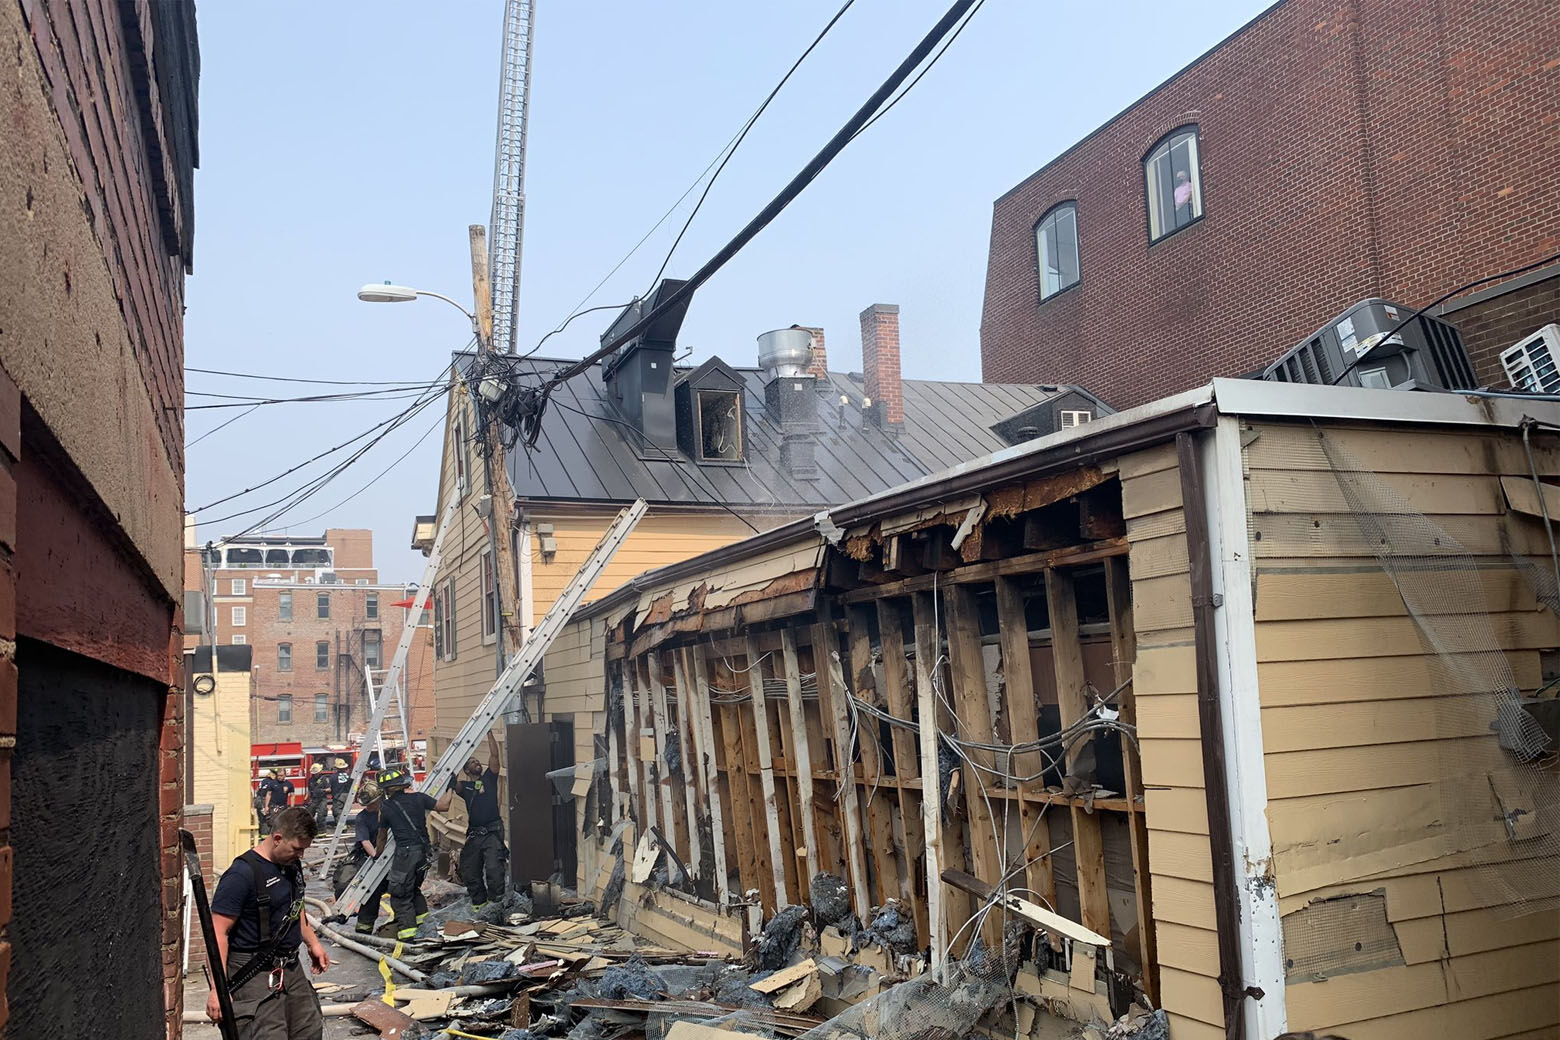 The fire broke out in an attached storage area behind Ristorante Piccolo on 31st Street in Georgetown. (WTOP/Mike Murillo)